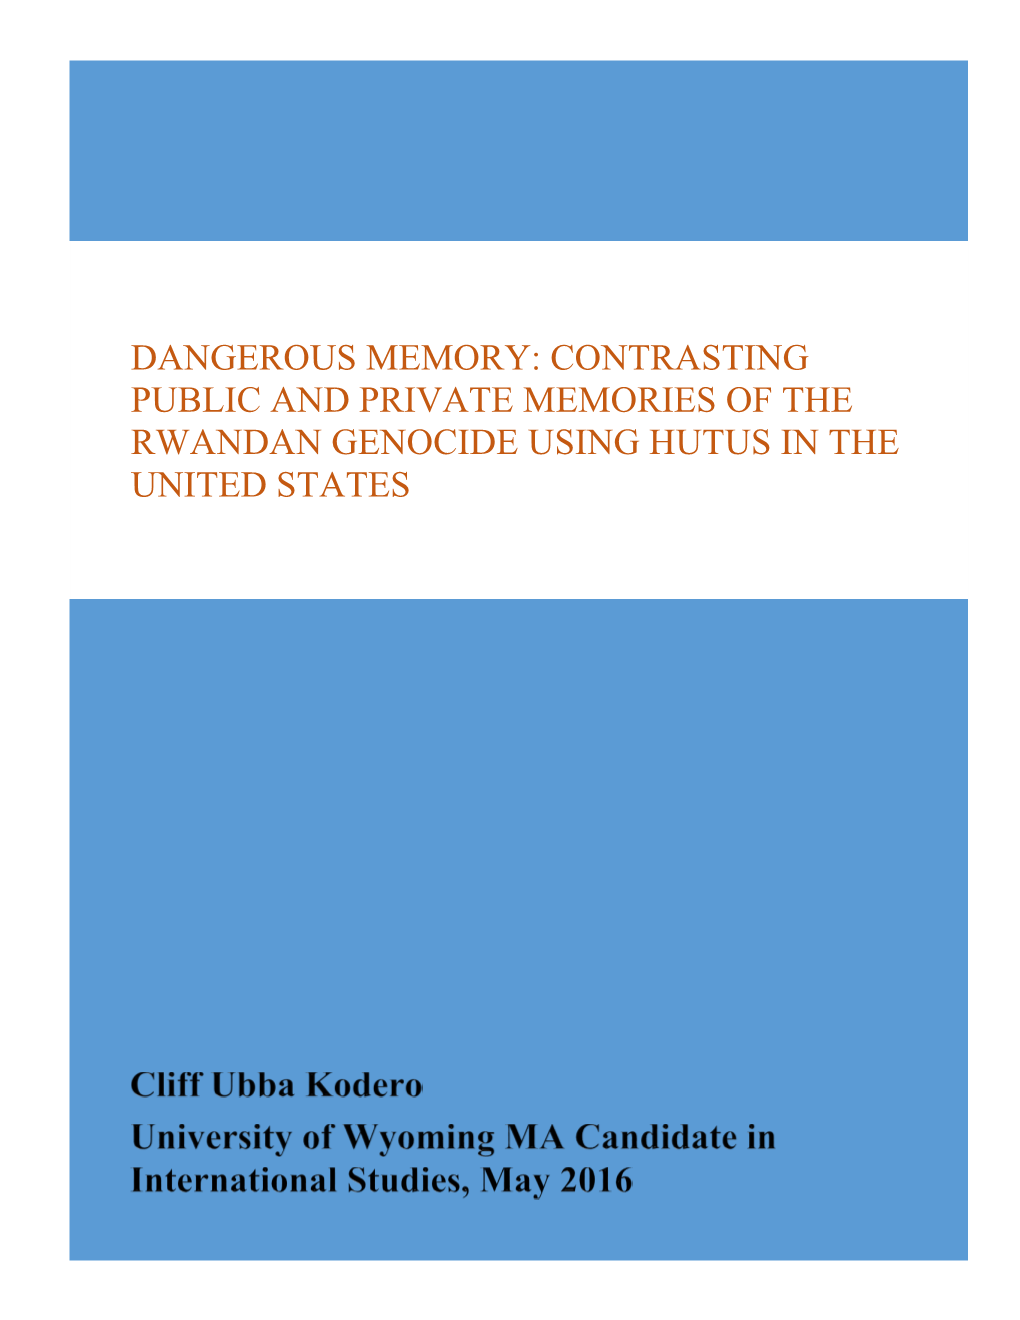 Contrasting Public and Private Memories of the Rwandan Genocide Using Hutus in the United States